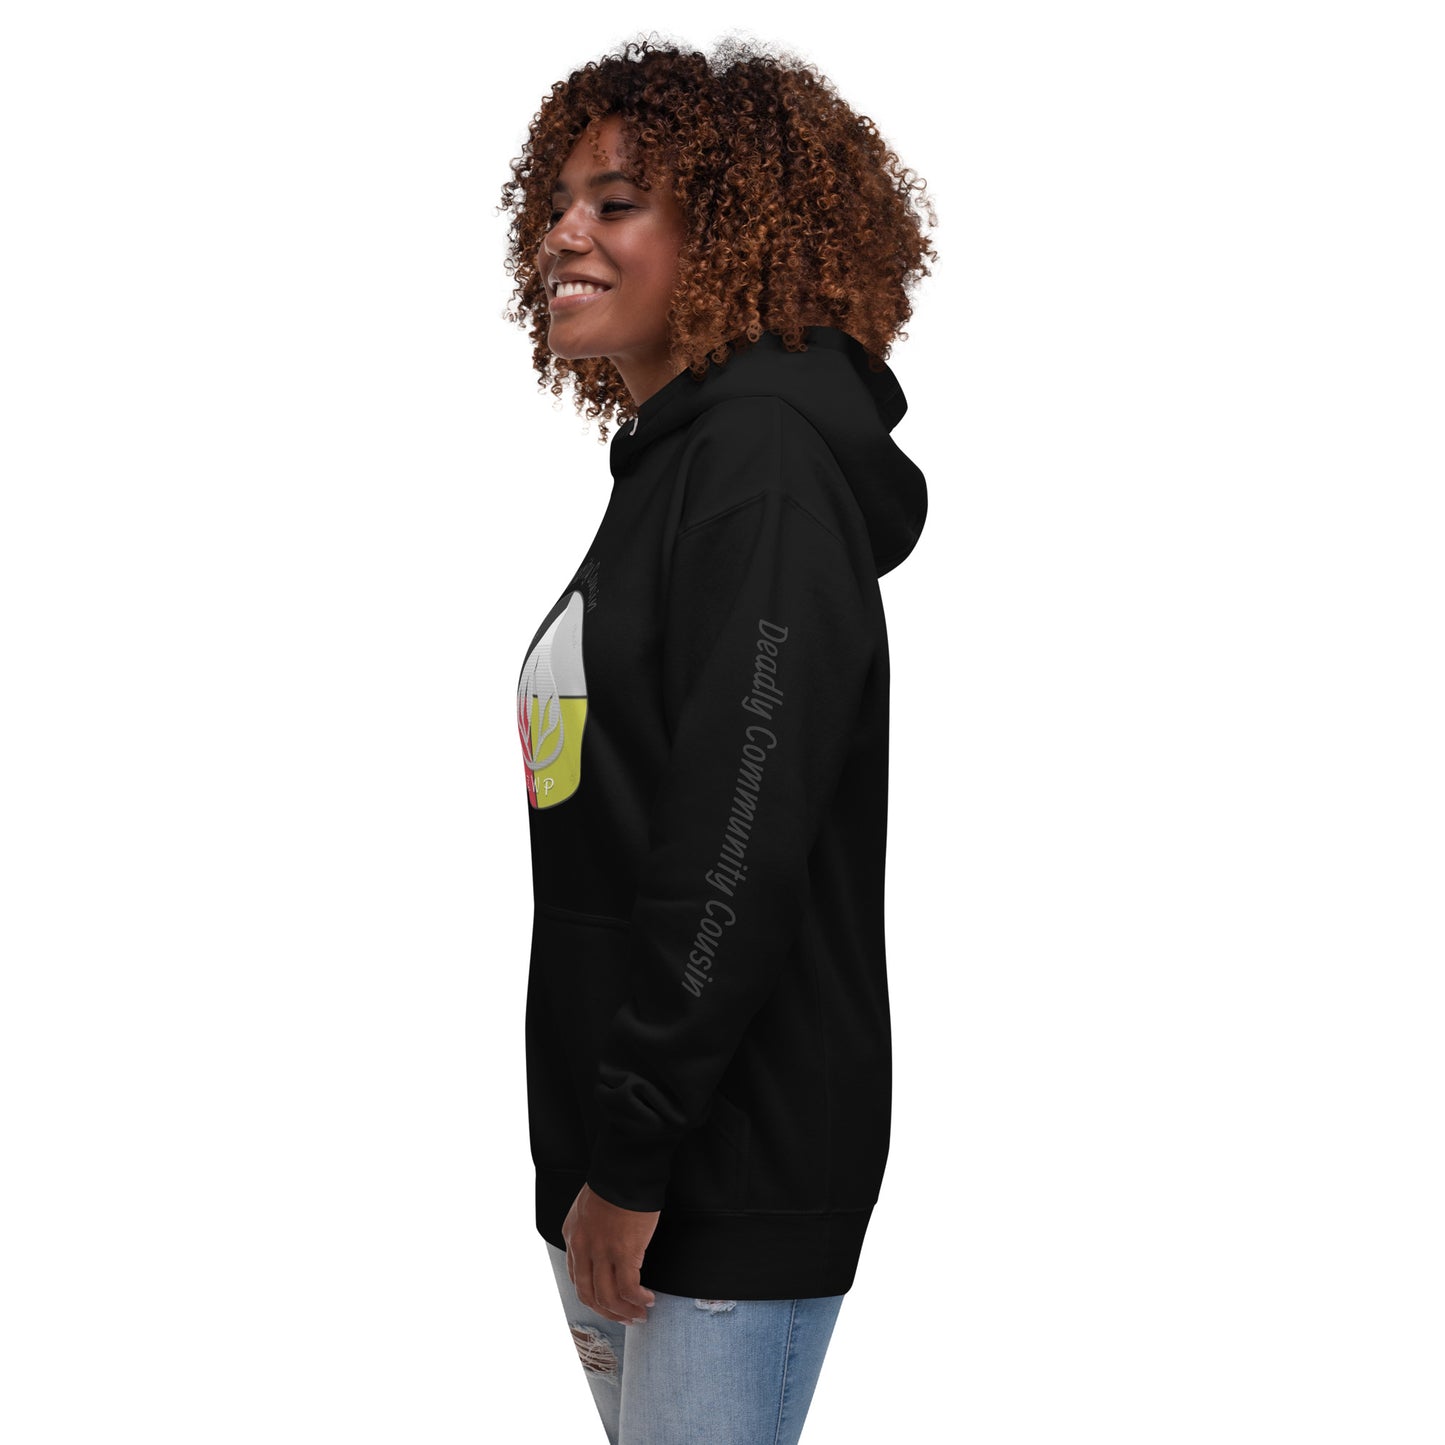 Community Cousin (Deadly) Unisex Hoodie